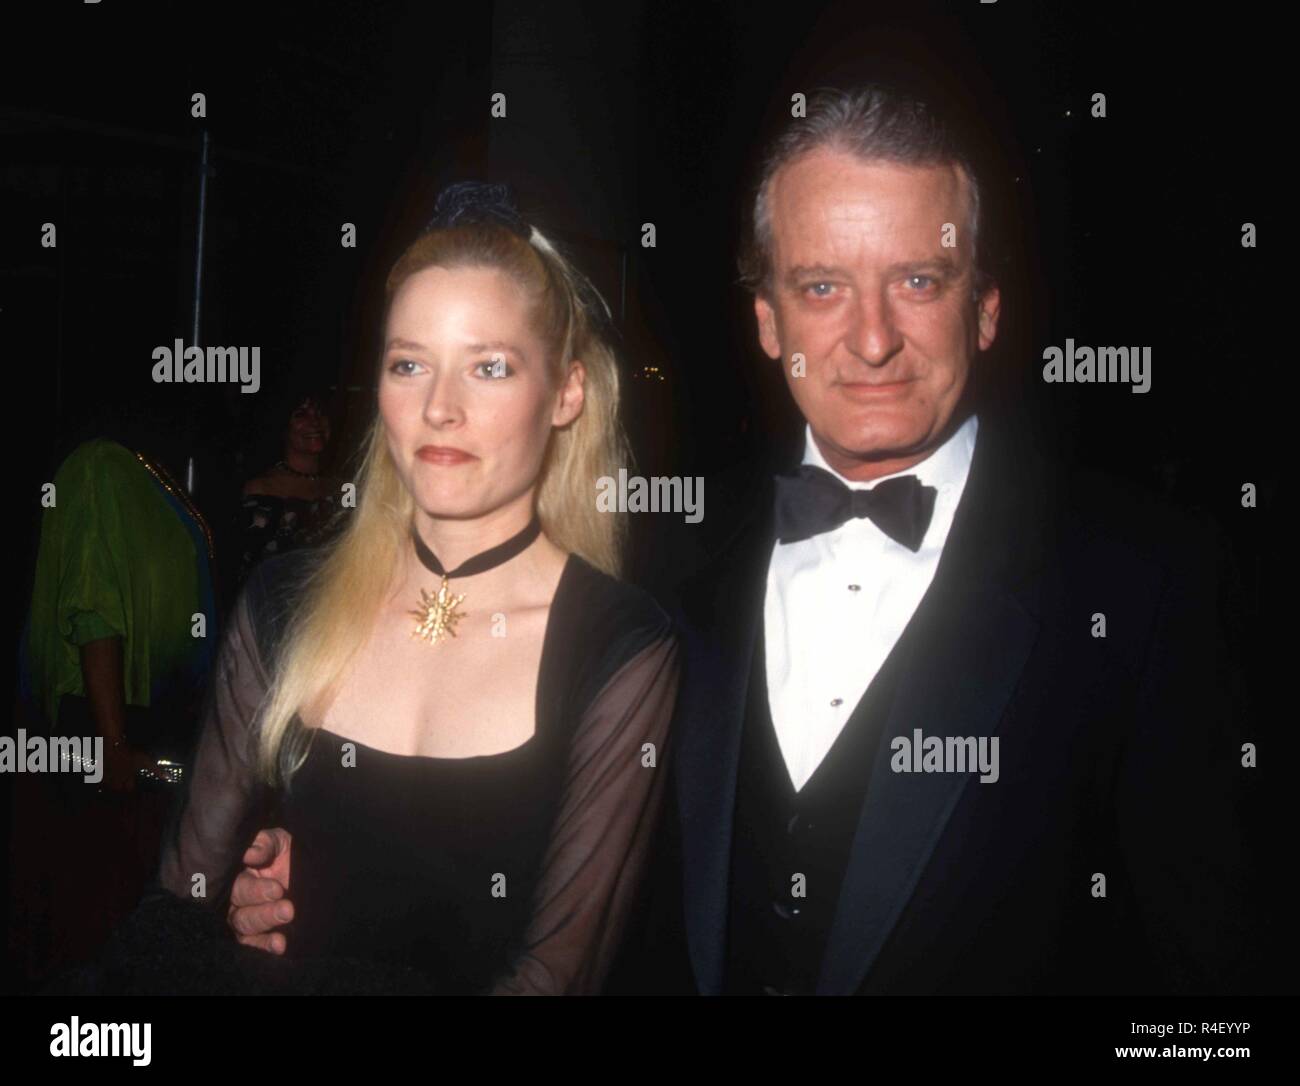 BEVERLY HILLS, CA - FEBRUARY 26: Actor Nicolas Coster (R) and guest attend the Ninth Annual Soap Opera Digest Awards on February 26, 1993 at the Beverly Hilton Hotel in Beverly Hills, California. Photo by Barry King/Alamy Stock Photo Stock Photo